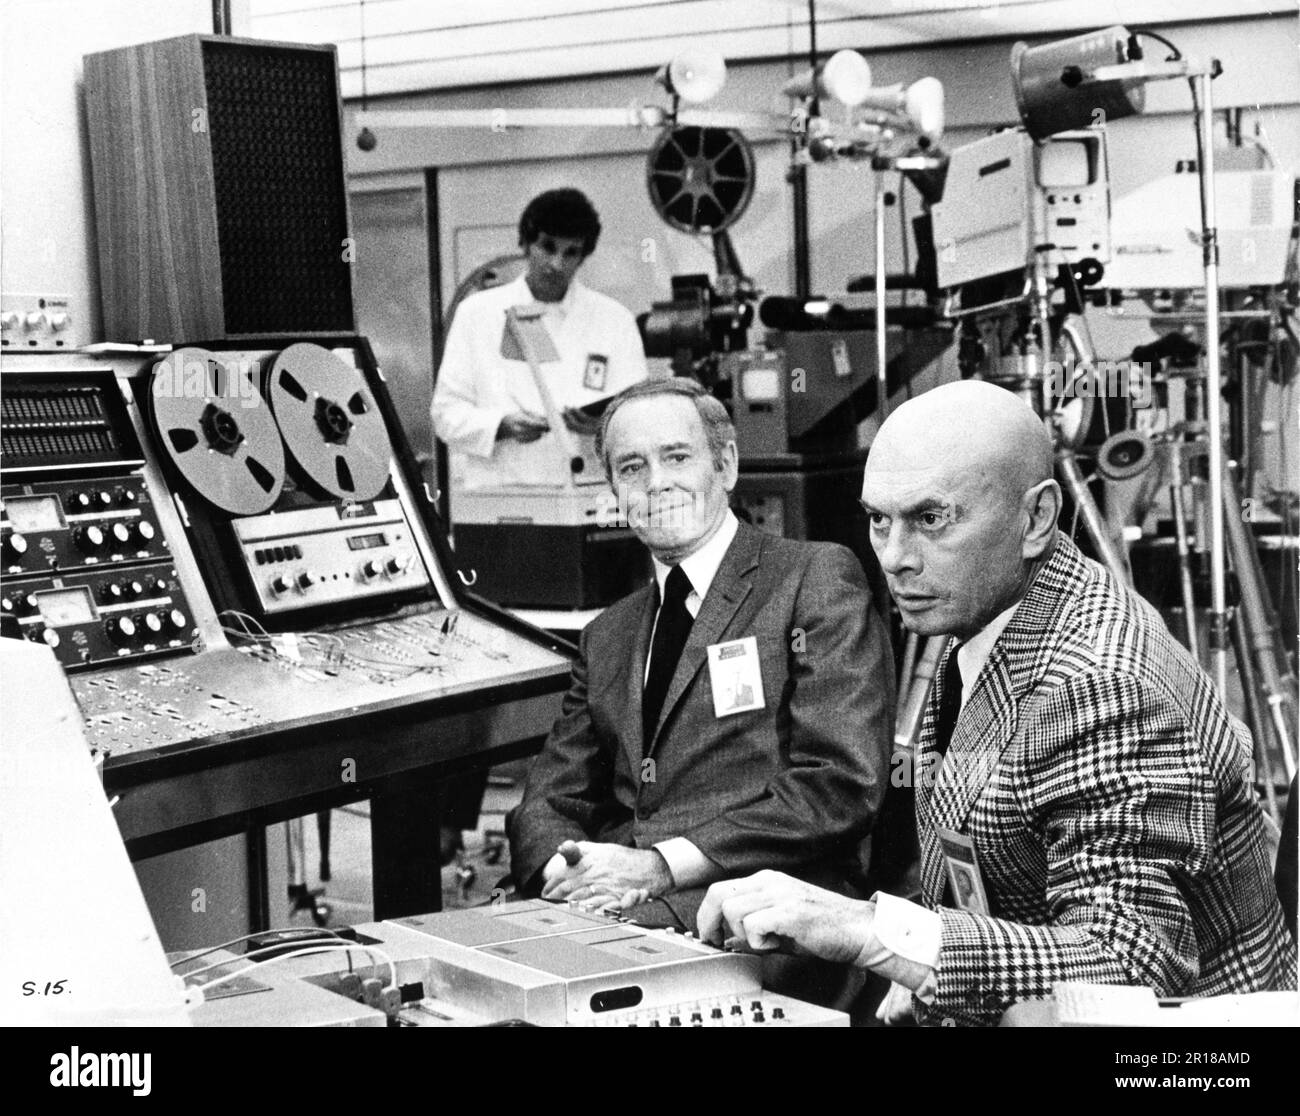 HENRY FONDA and YUL BRYNNER in THE SERPENT / LE SERPENT 1973 director HENRI VERNEUIL novel Pierre Nord music Ennio Morricone France-Italy-West Germany co-production Les Films de la Boetie / Euro International Films / Rialto Film Stock Photo